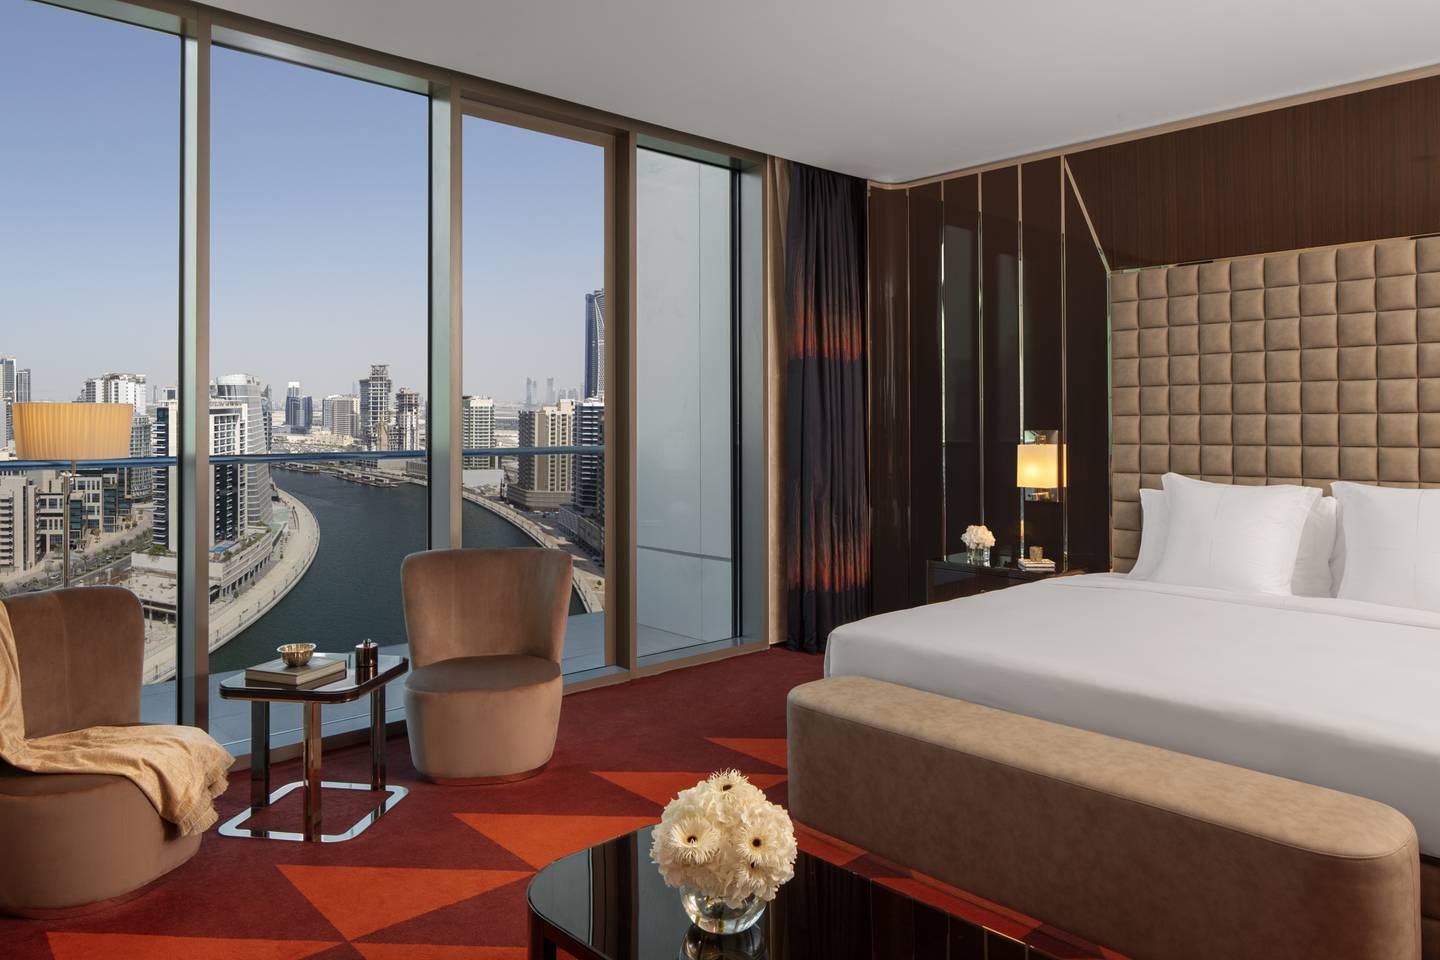 Hyde Hotel Dubai has 276 guest rooms, and all of them come with their own private balcony. Photo: Hyde Hotel Dubai